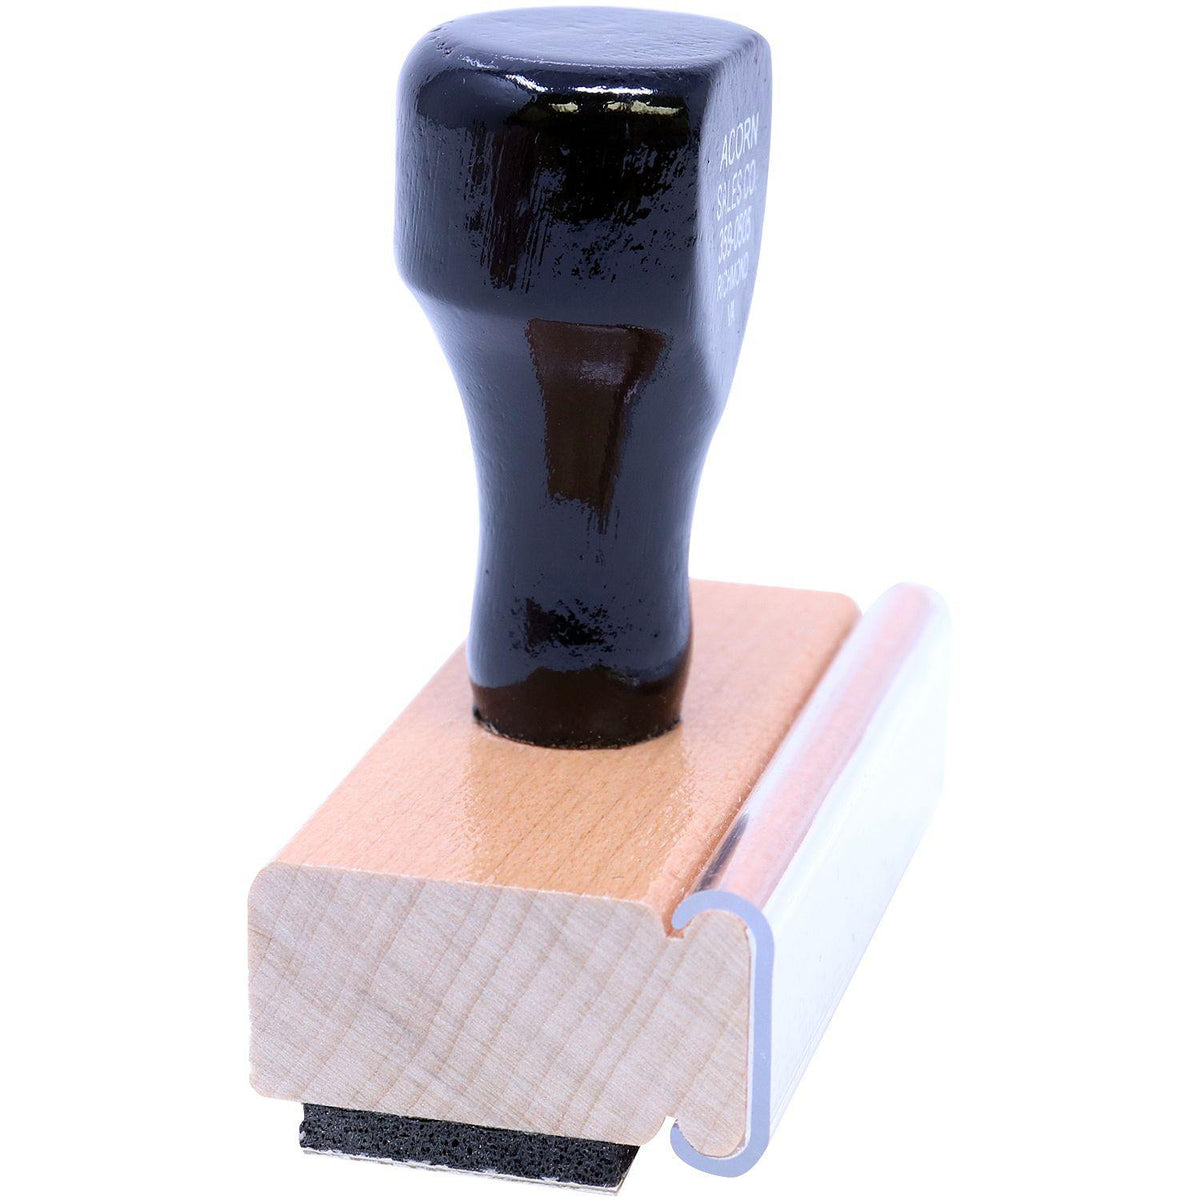 Side View of Large Forgery Rubber Stamp at an Angle